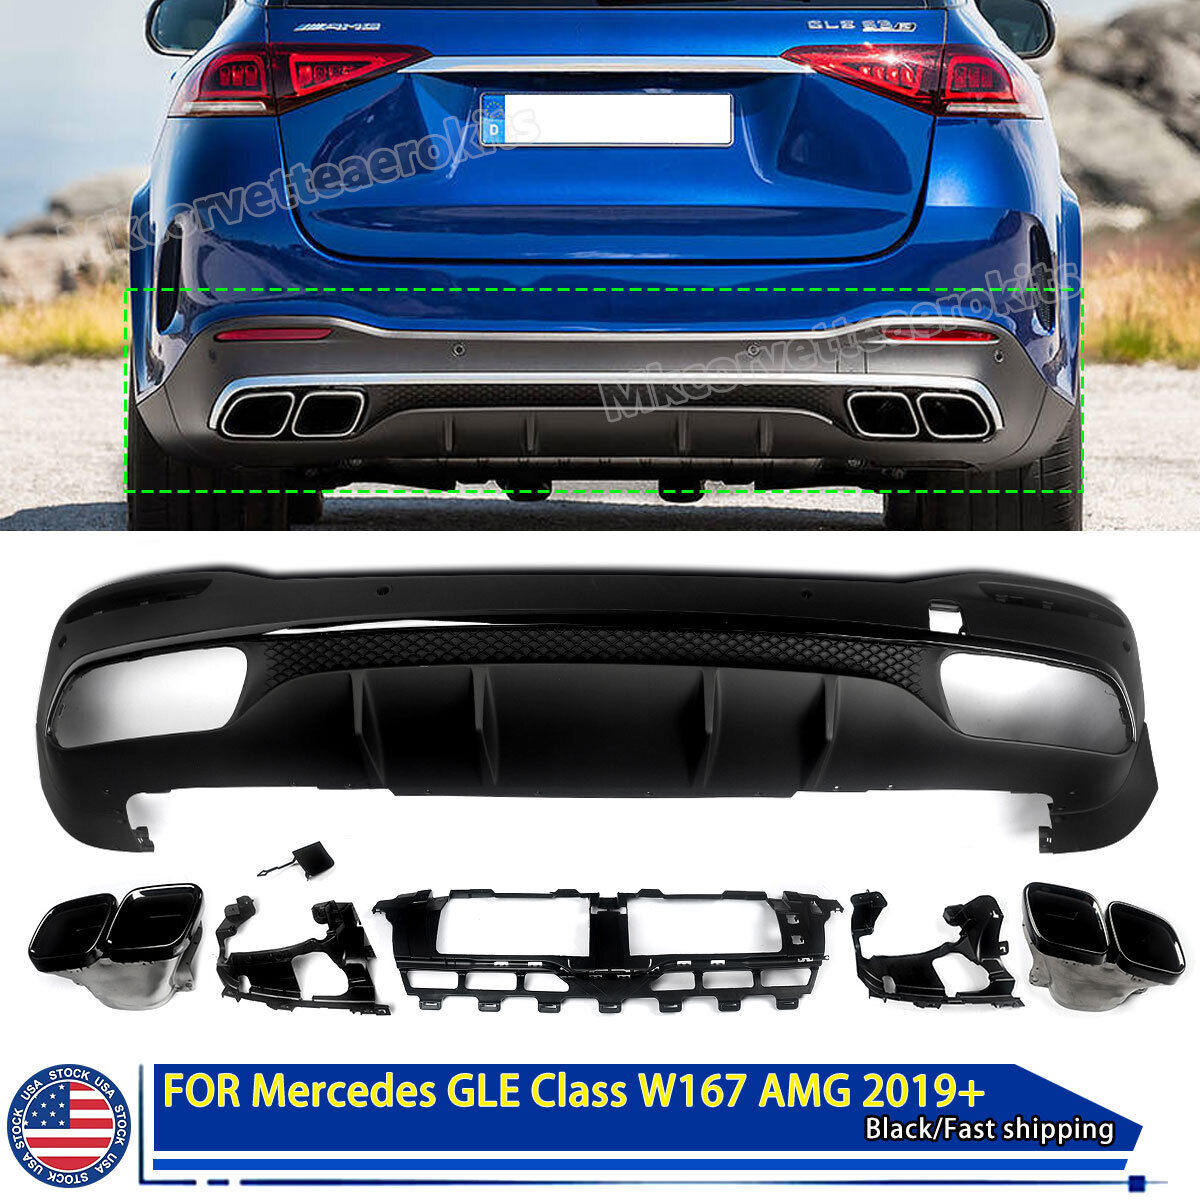 GLE63 AMG Style Rear Diffuser Valance For 2019+ Mercedes GLE W167 AMG W/ Exhaust